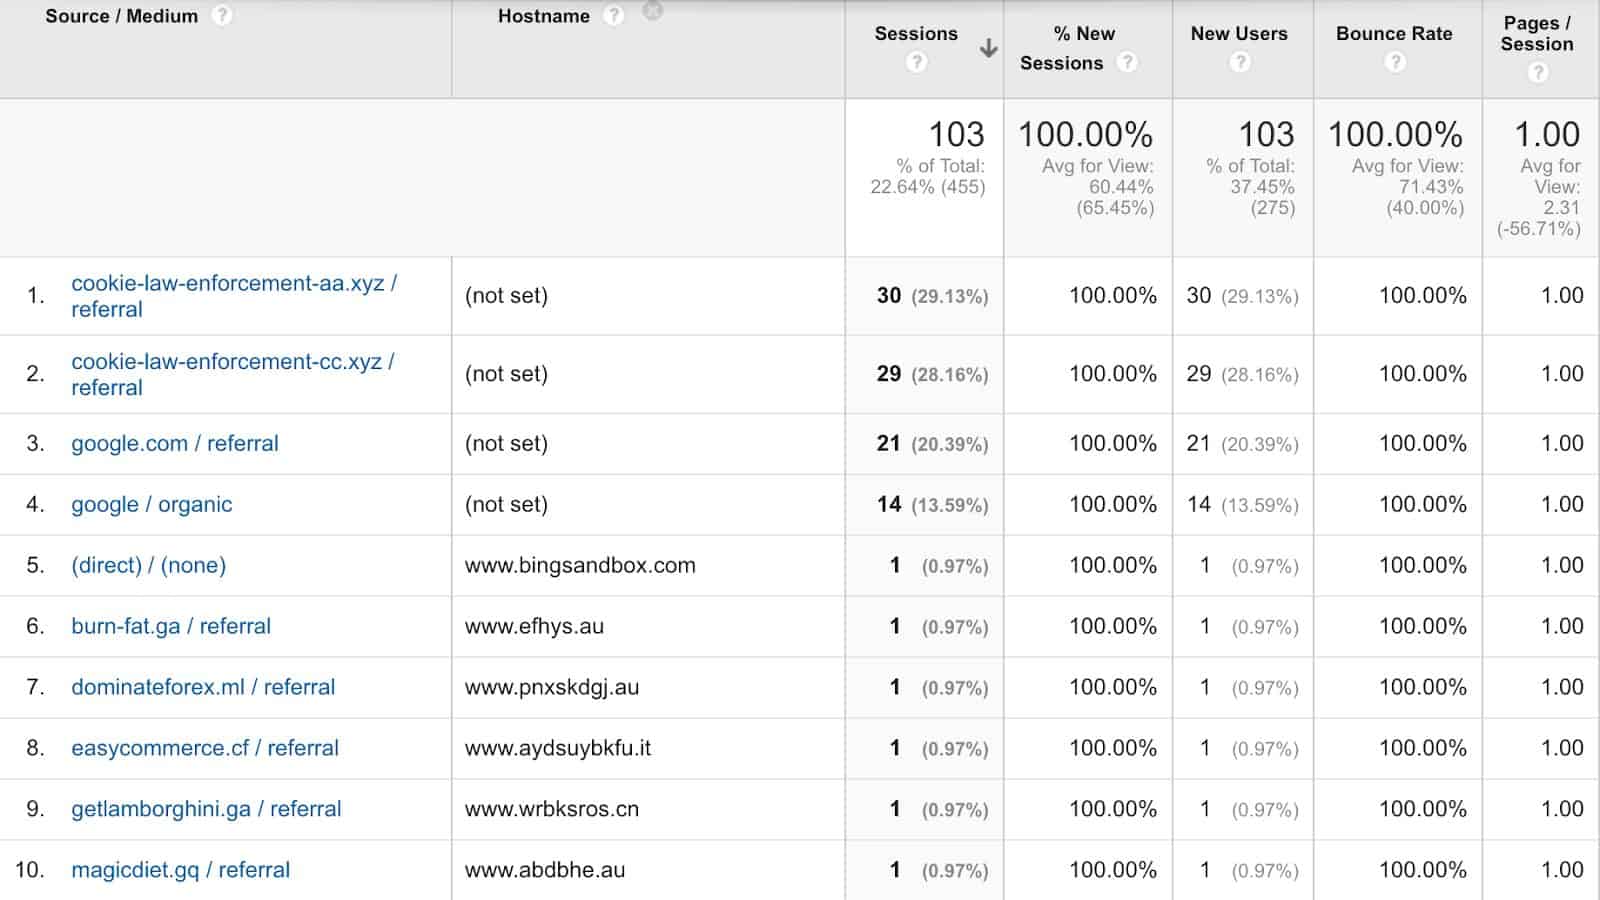 Get Rid of Campaign Spam in Google Analytics